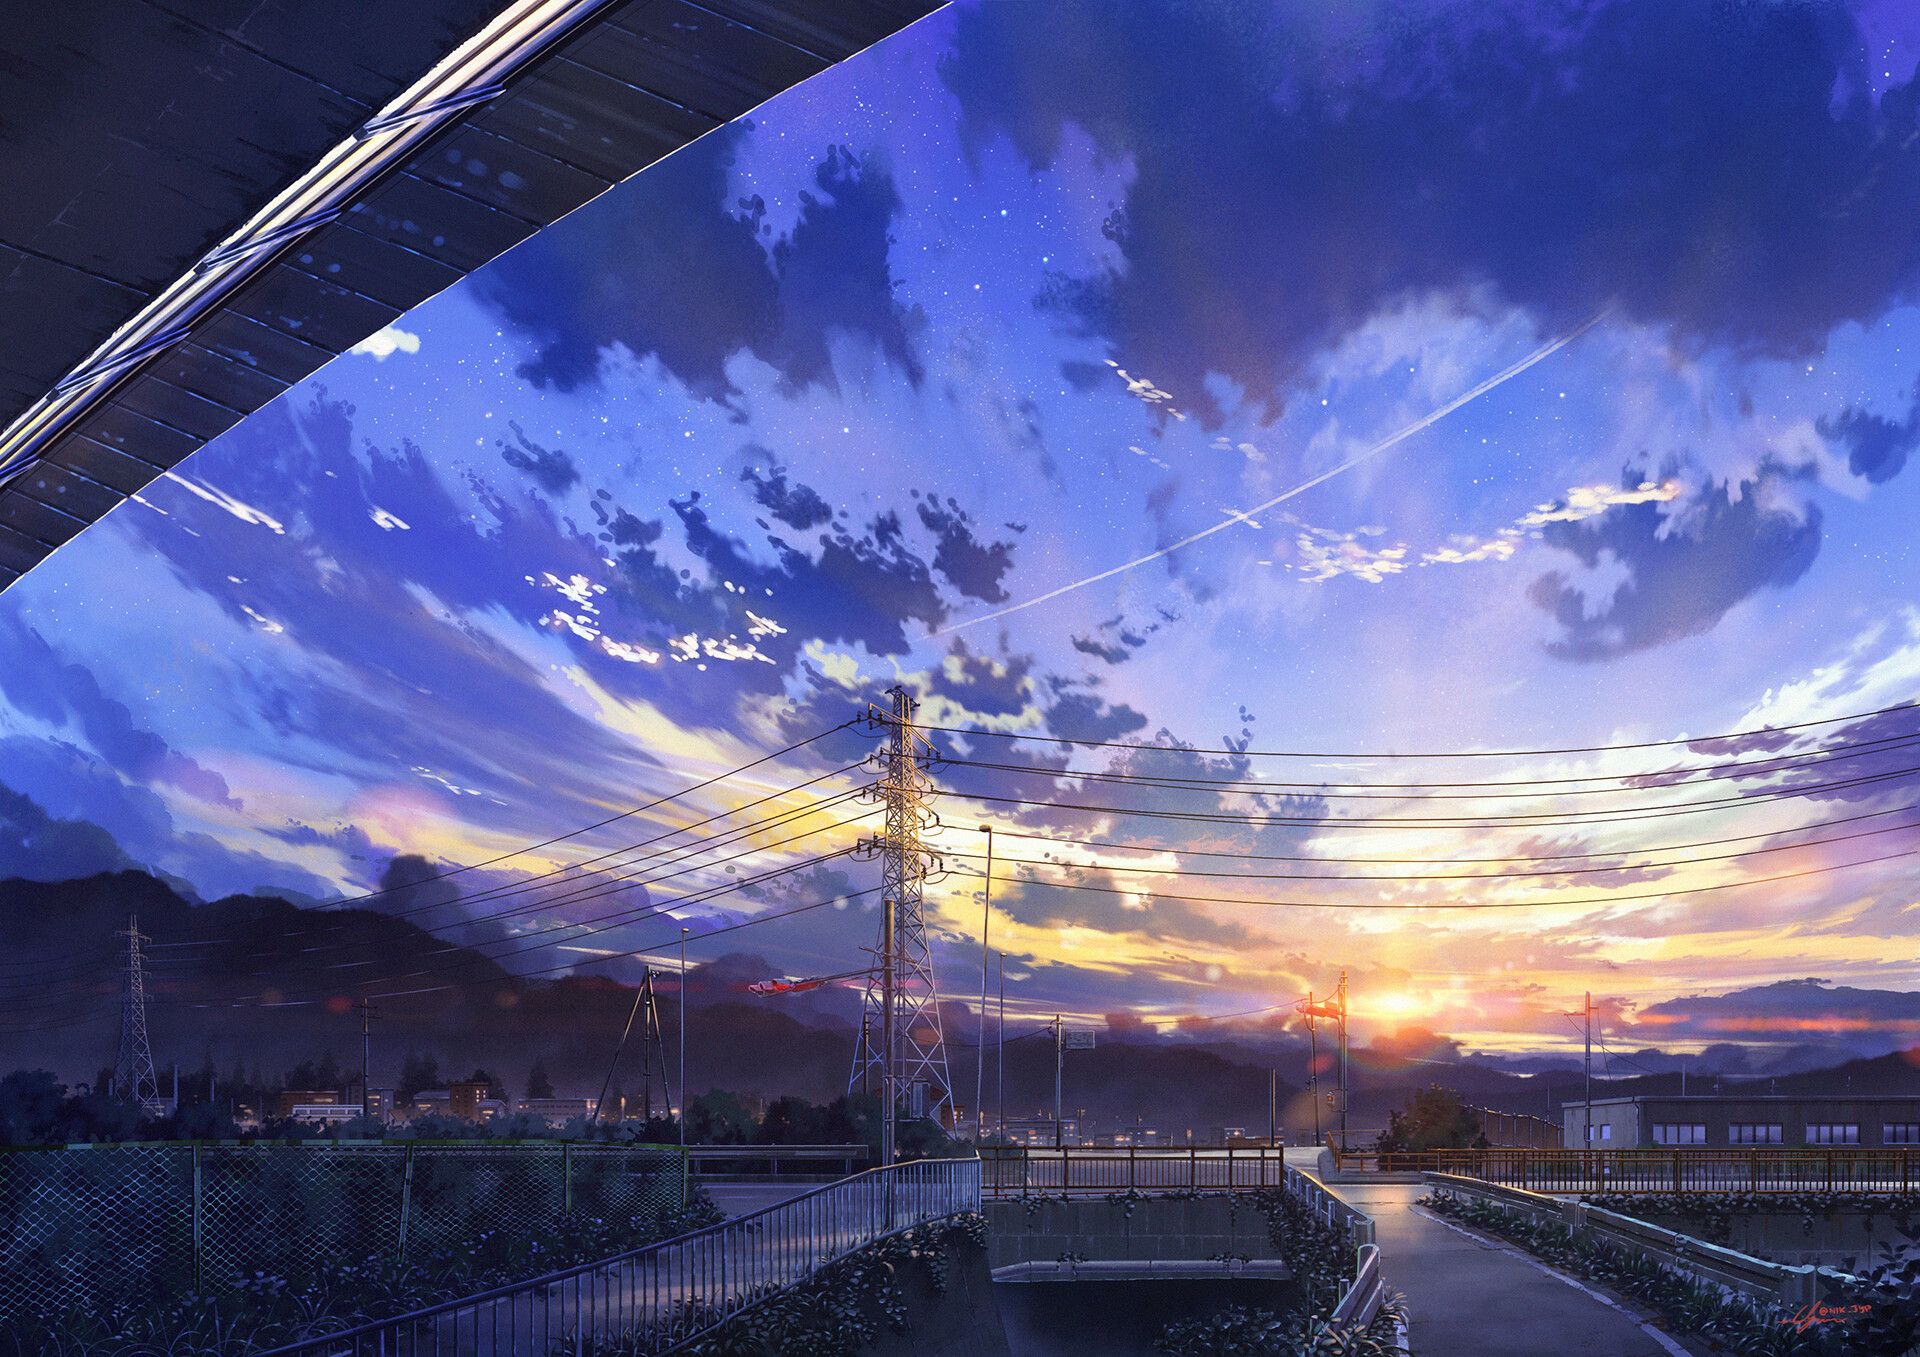 Japan City Digital Art, HD Anime, 4k Wallpaper, Image, Background, Photo and Picture